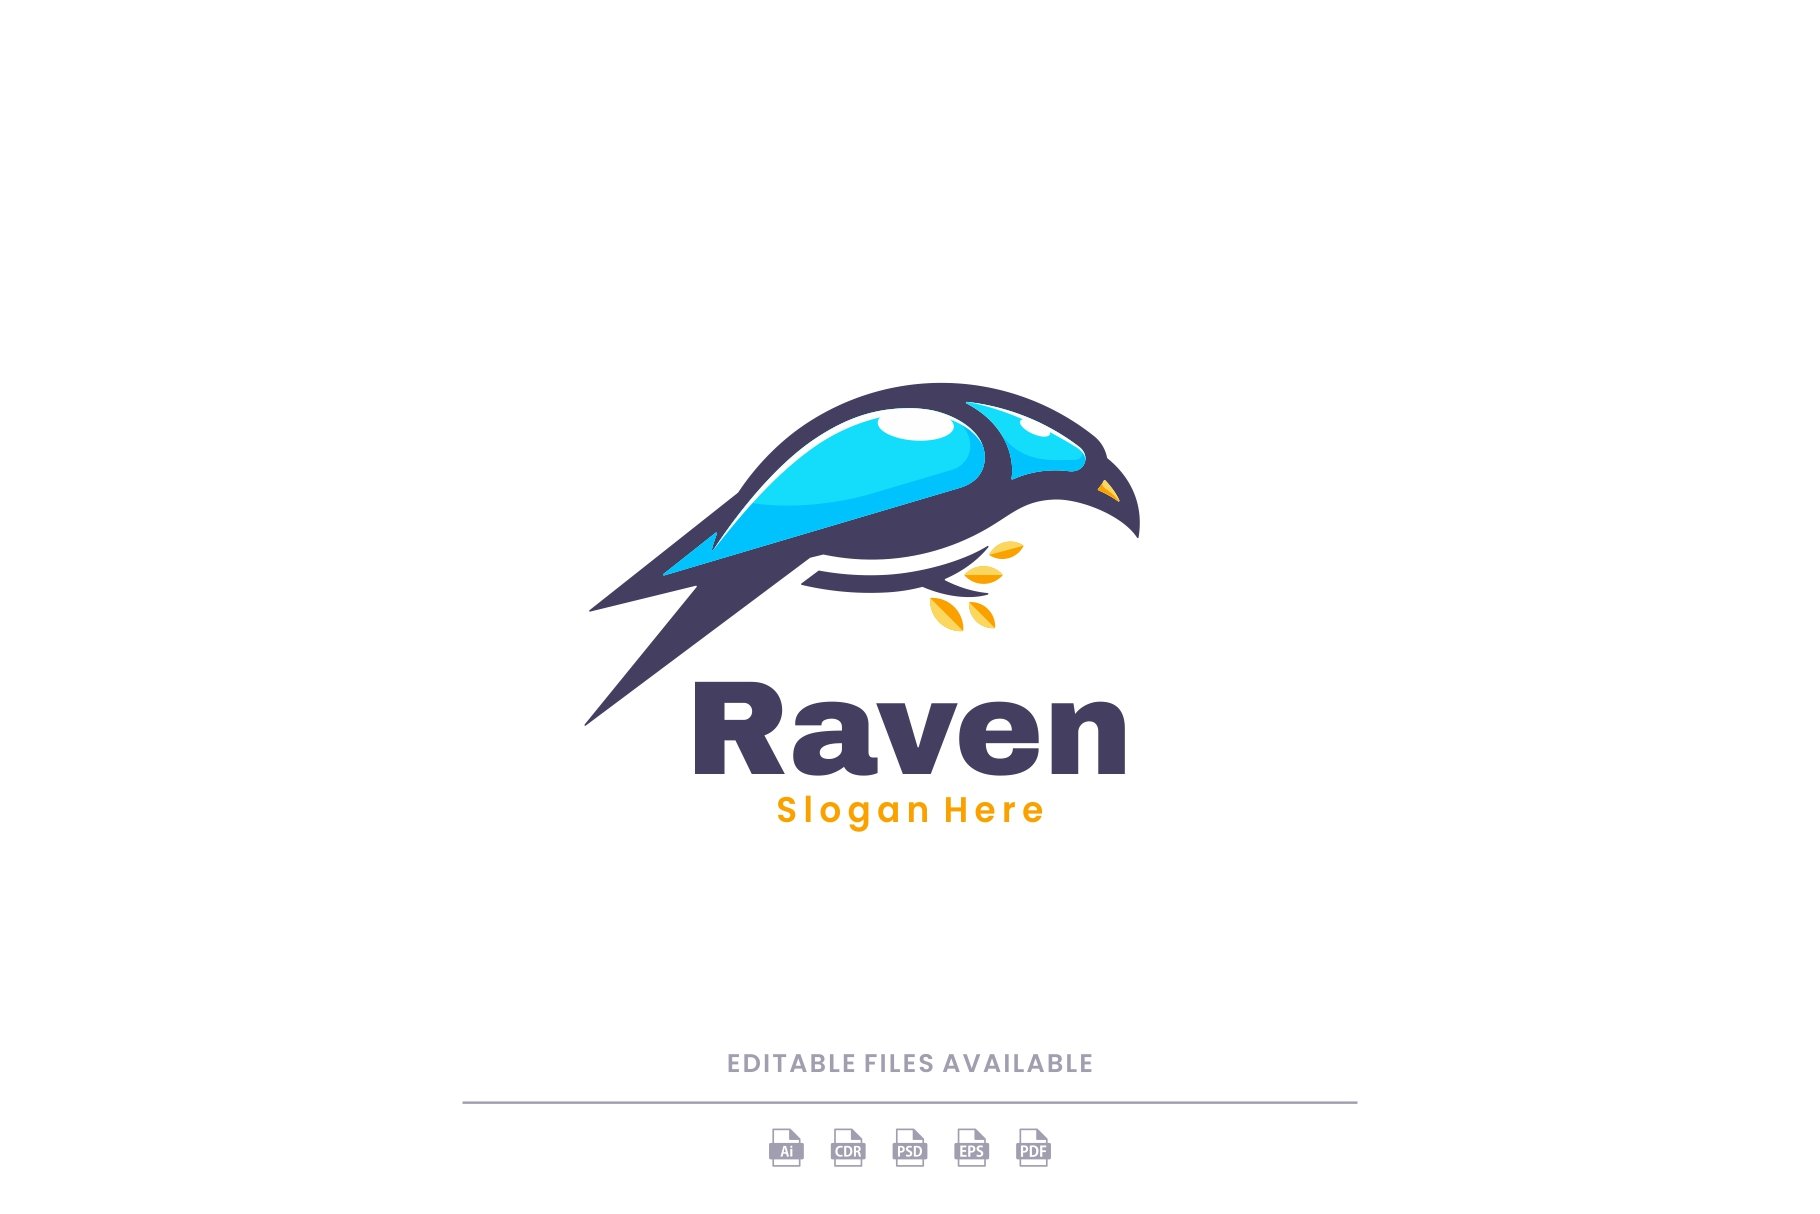 Raven Simple Logo cover image.